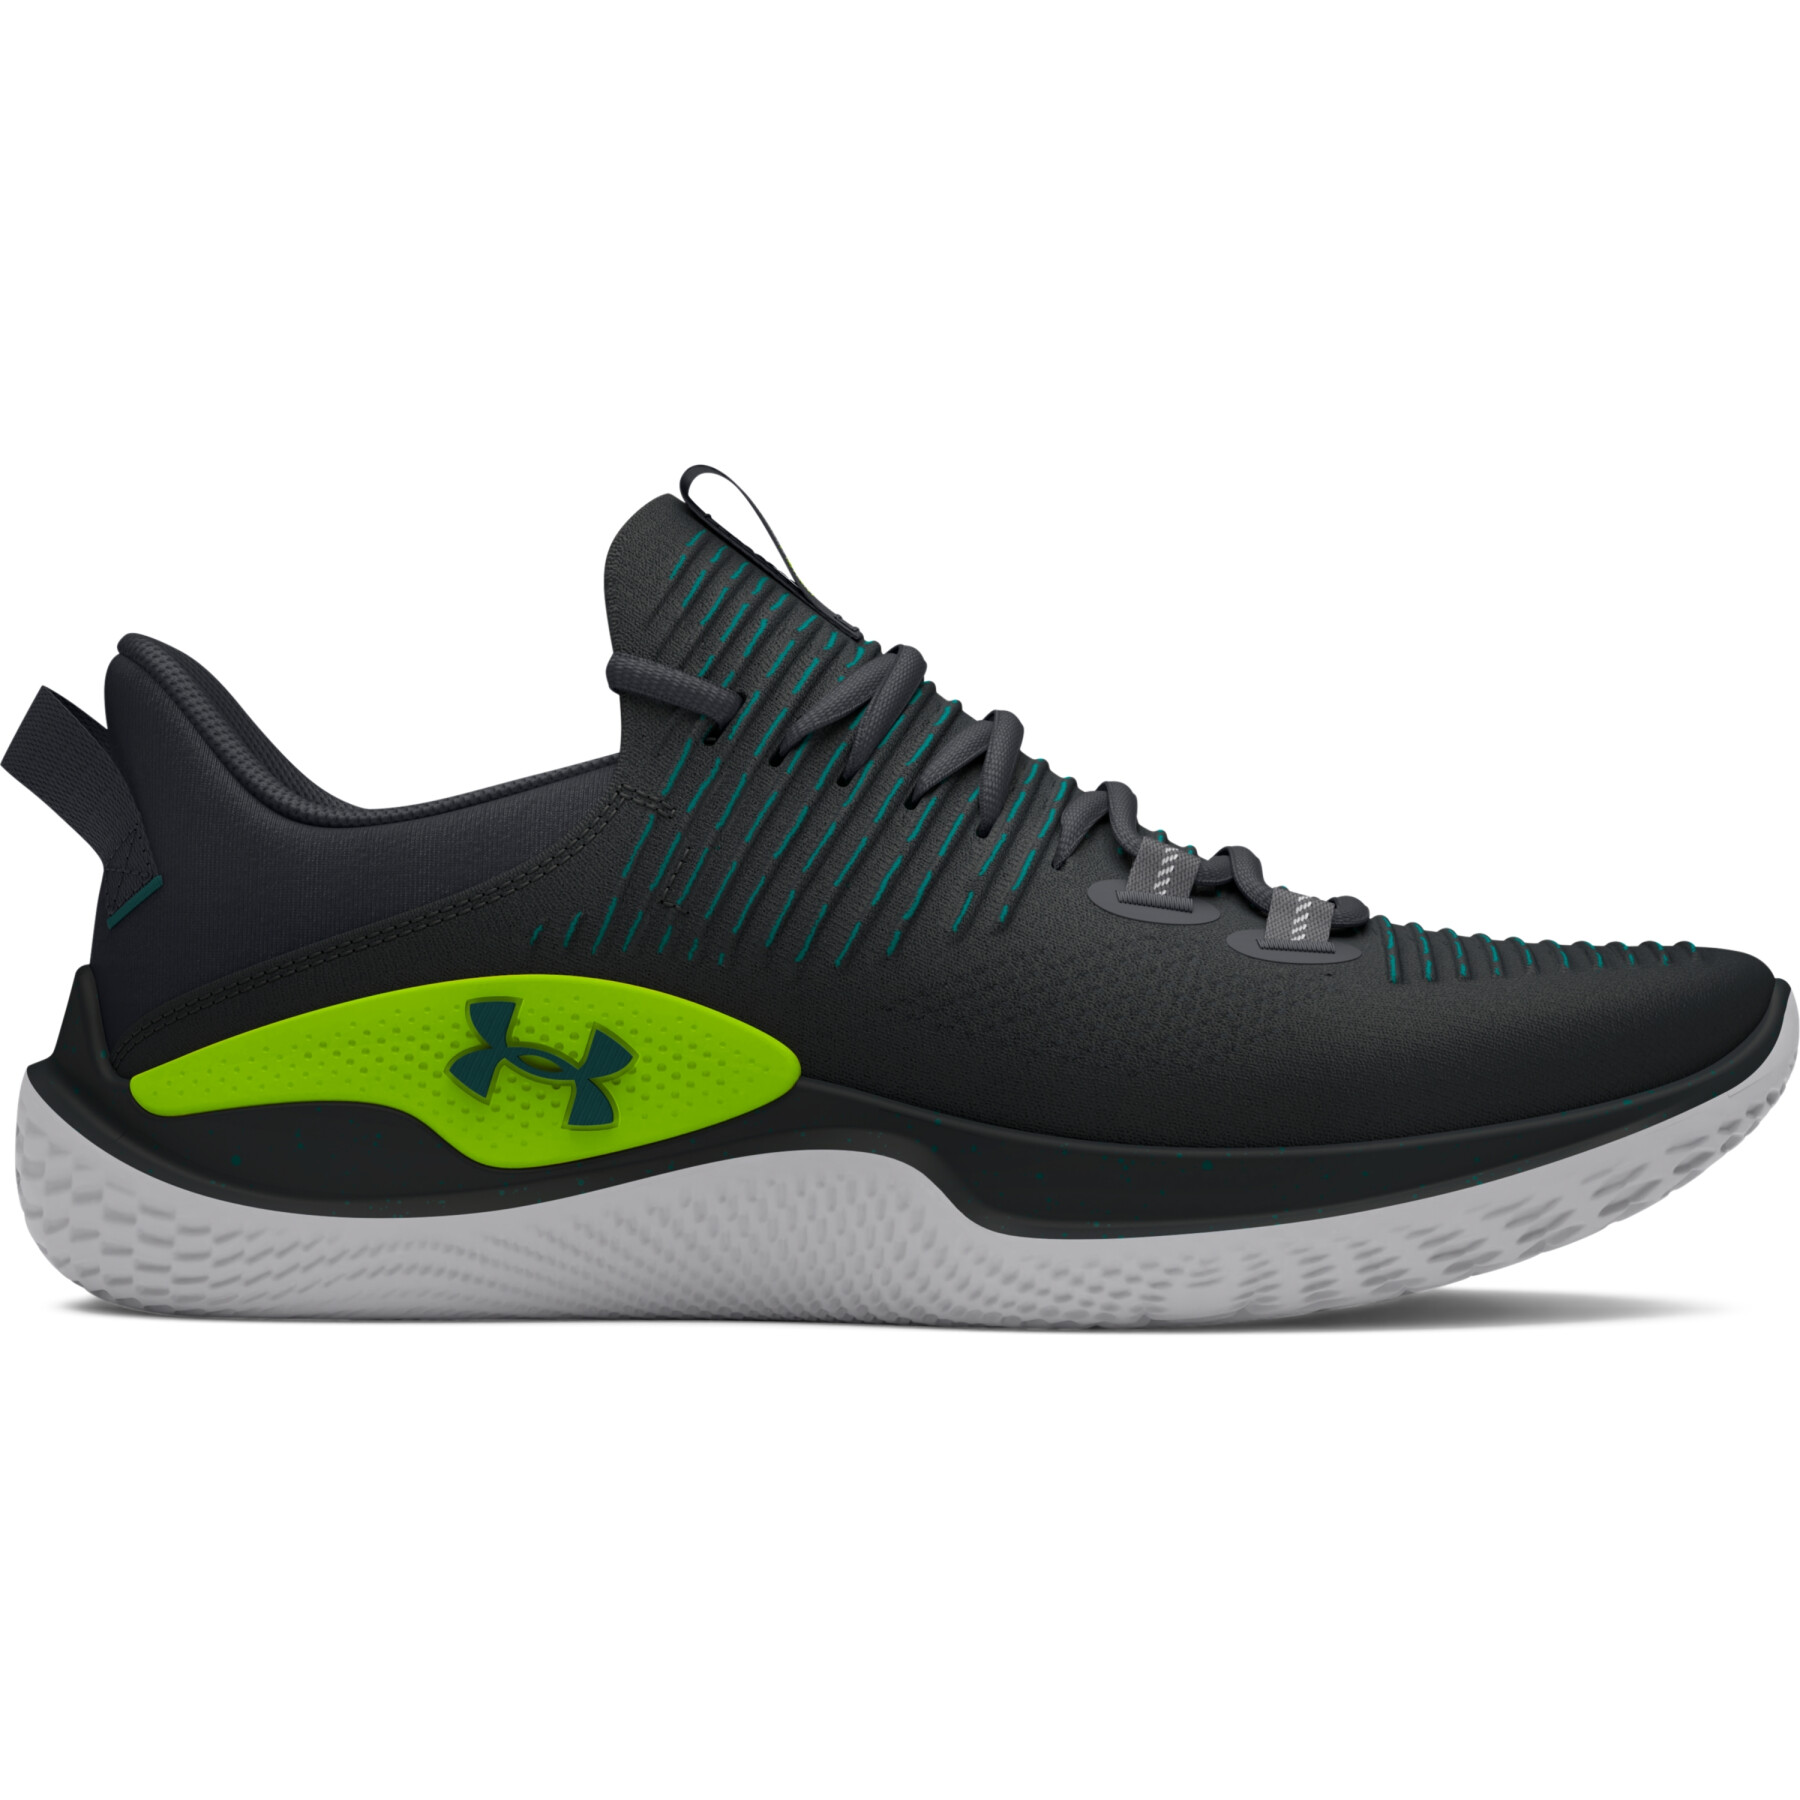 Cross training shoes Under Armour Flow Dynamic IntelliKnit